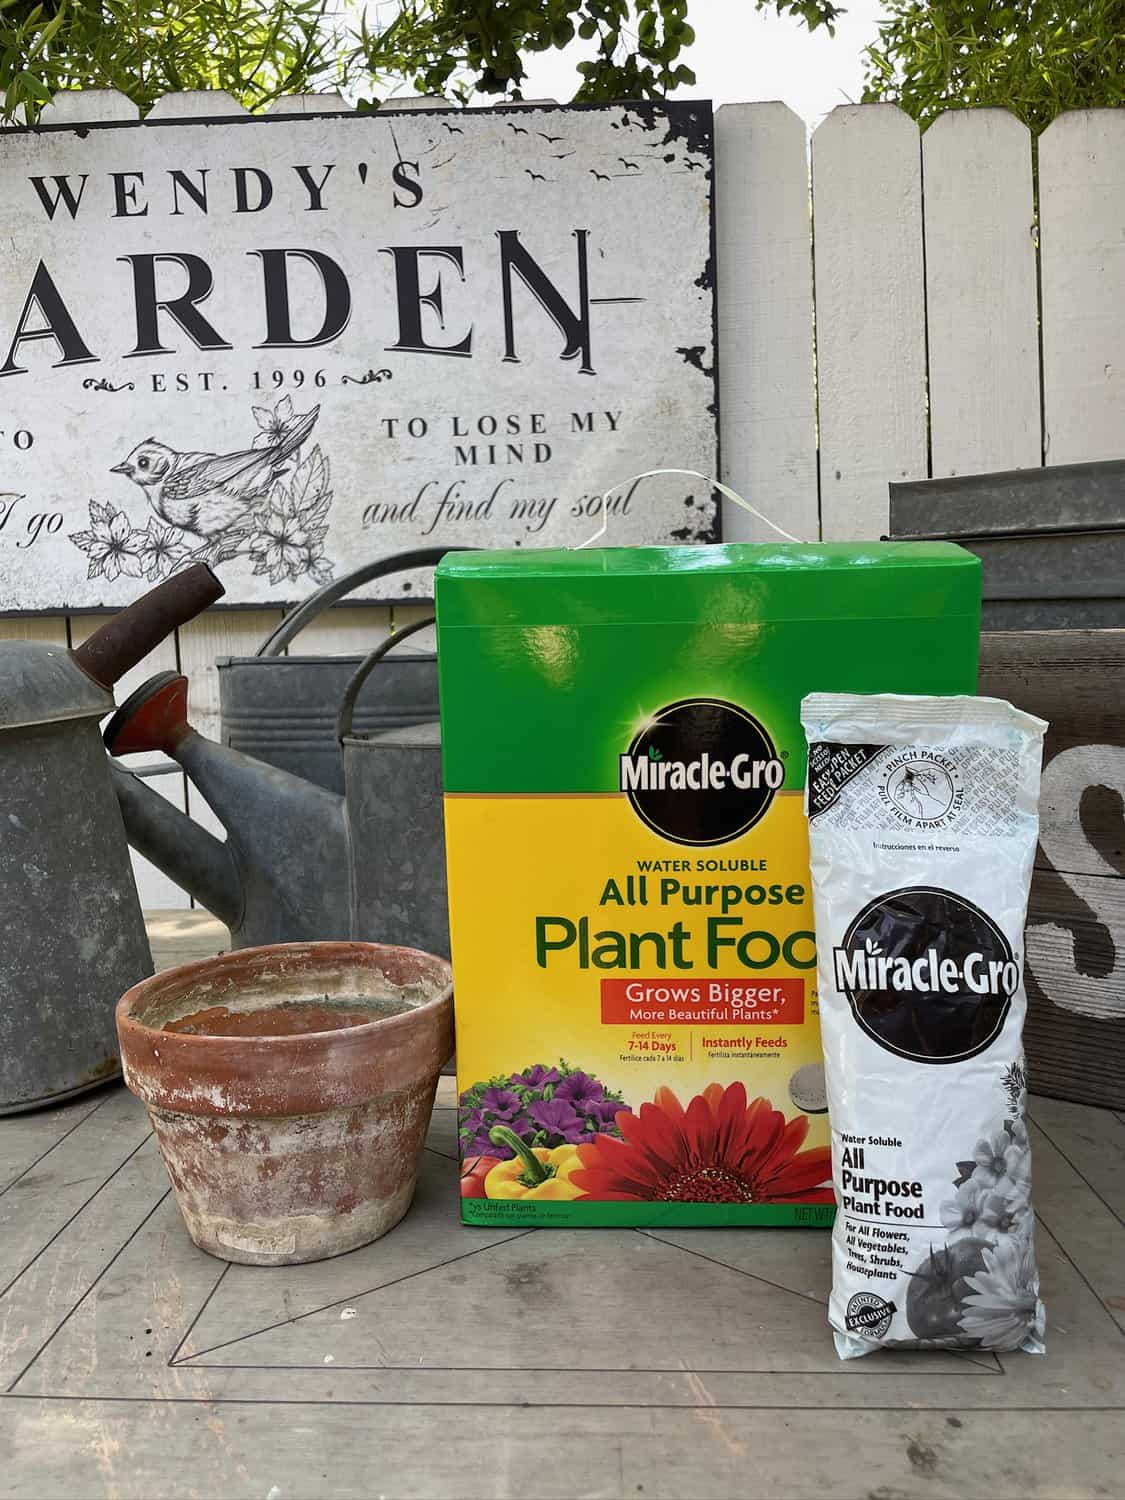 Miracle-Gro fertilizer and supplies to age terracotta pots using the fertilizer and water method